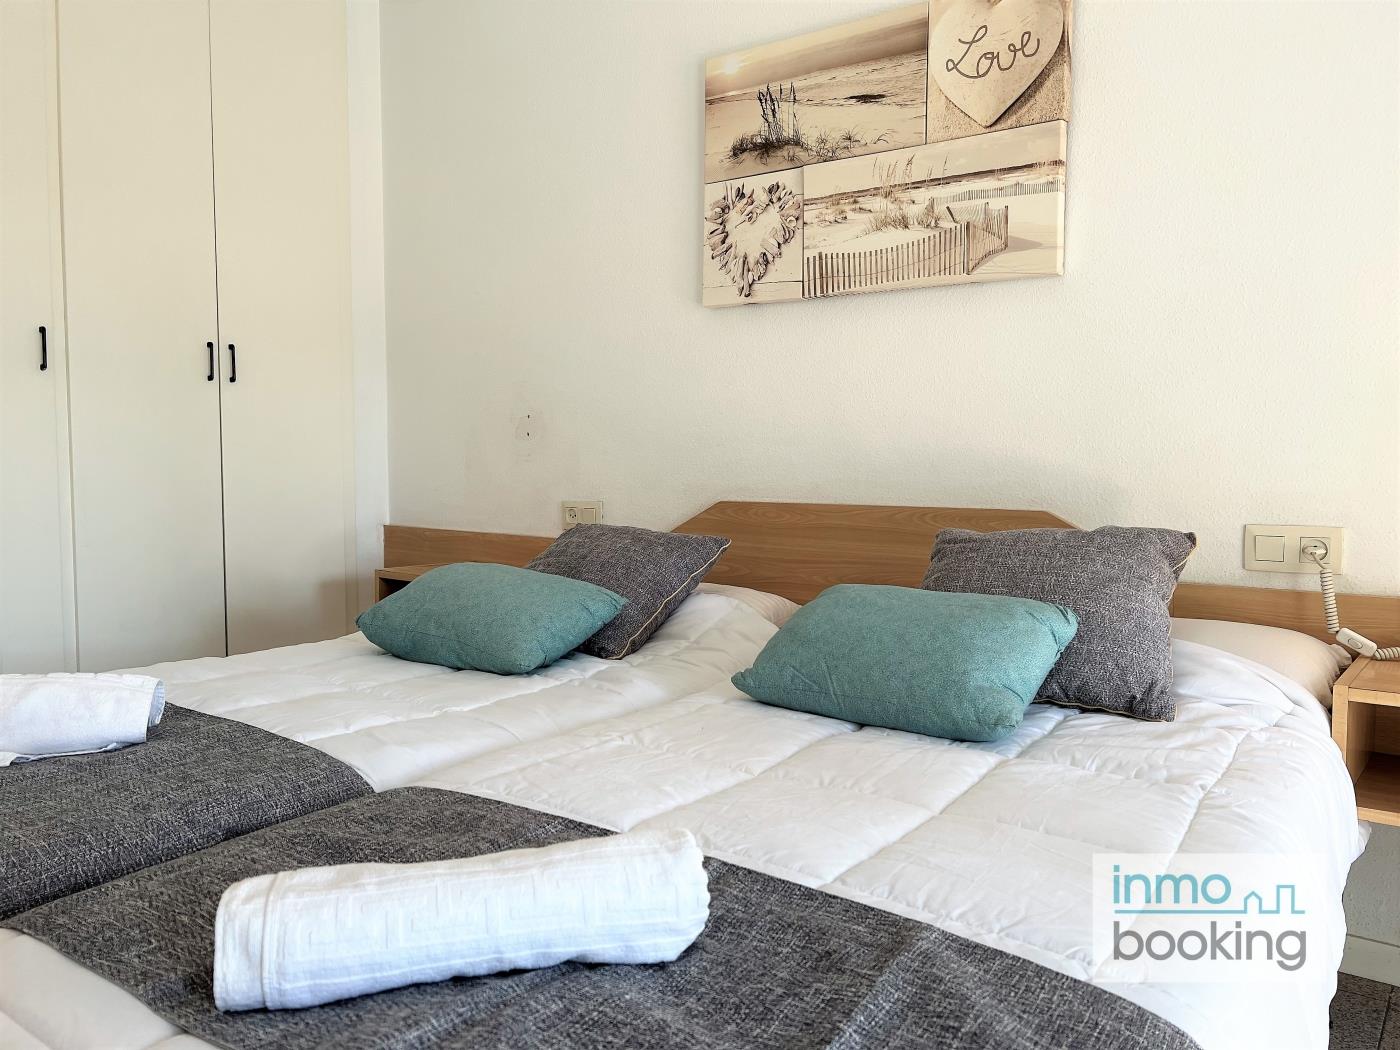 InmoBooking Cannes Apartments, great location and pool in salou